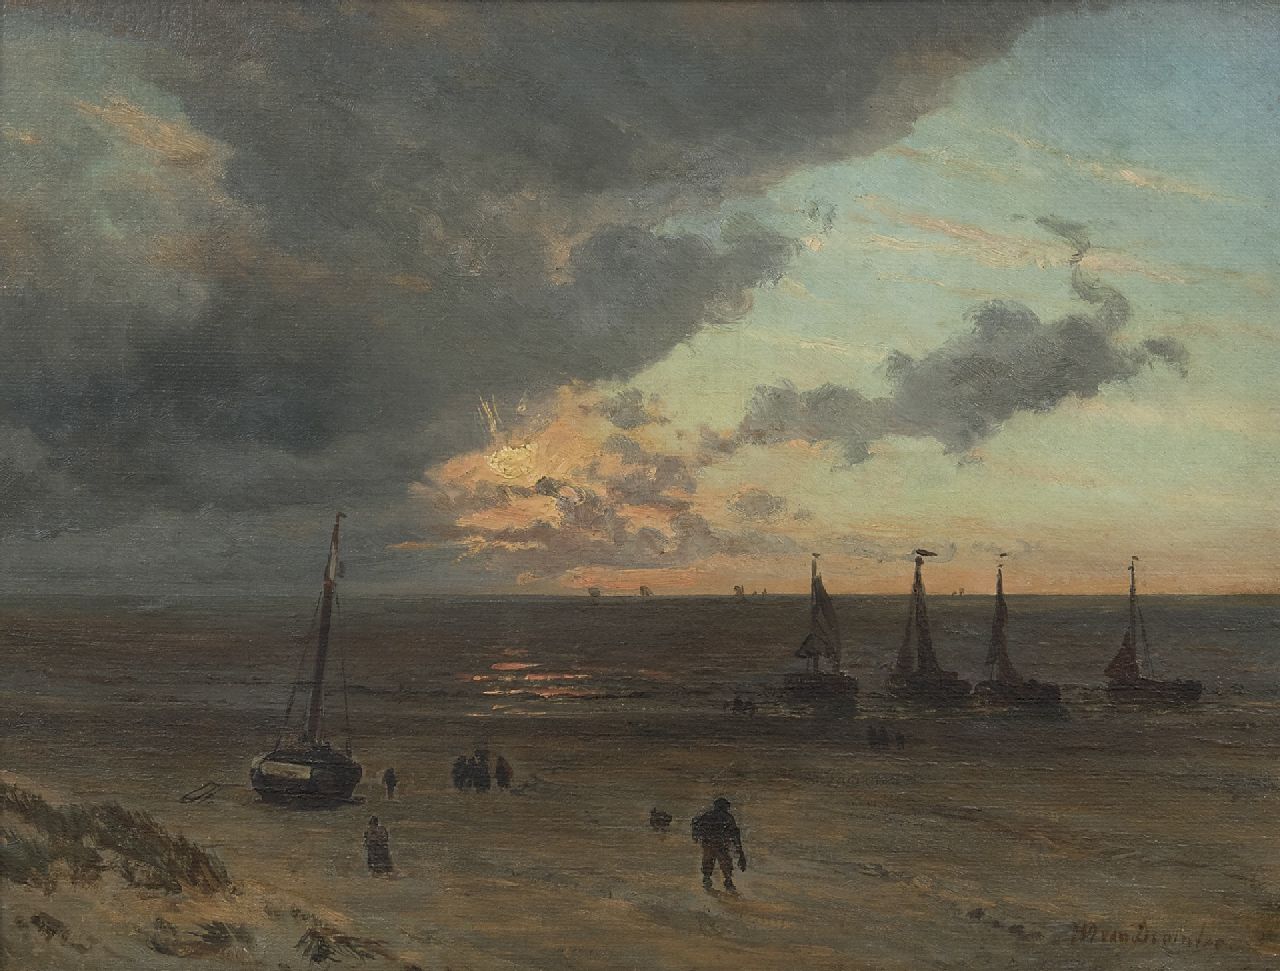 Deventer W.A. van | 'Willem' Anthonie van Deventer | Paintings offered for sale | A view of a beach with fishermen, oil on paper laid down on panel 32.0 x 41.6 cm, signed l.r.